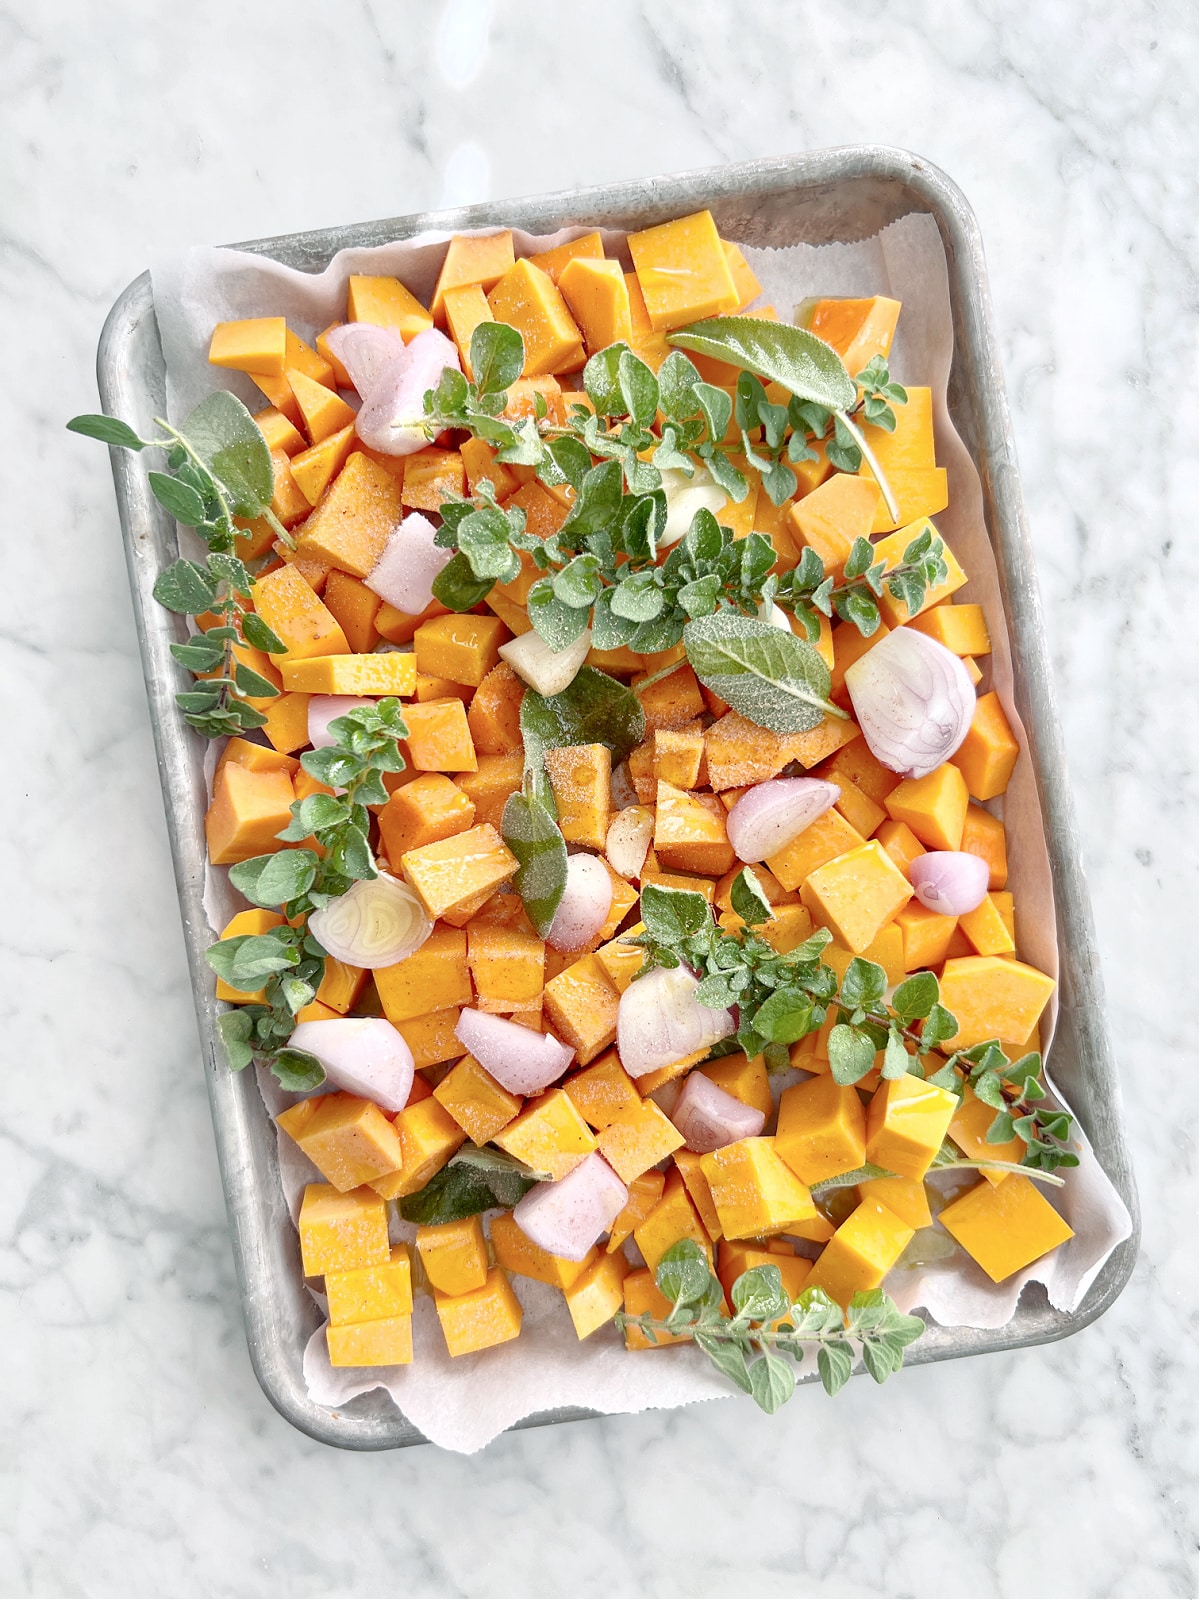 Overhead view of cubes of butternut squash, several garlic cloves and shallots, sprigs of oregano and sage leaves on a baking sheet ready to roast.